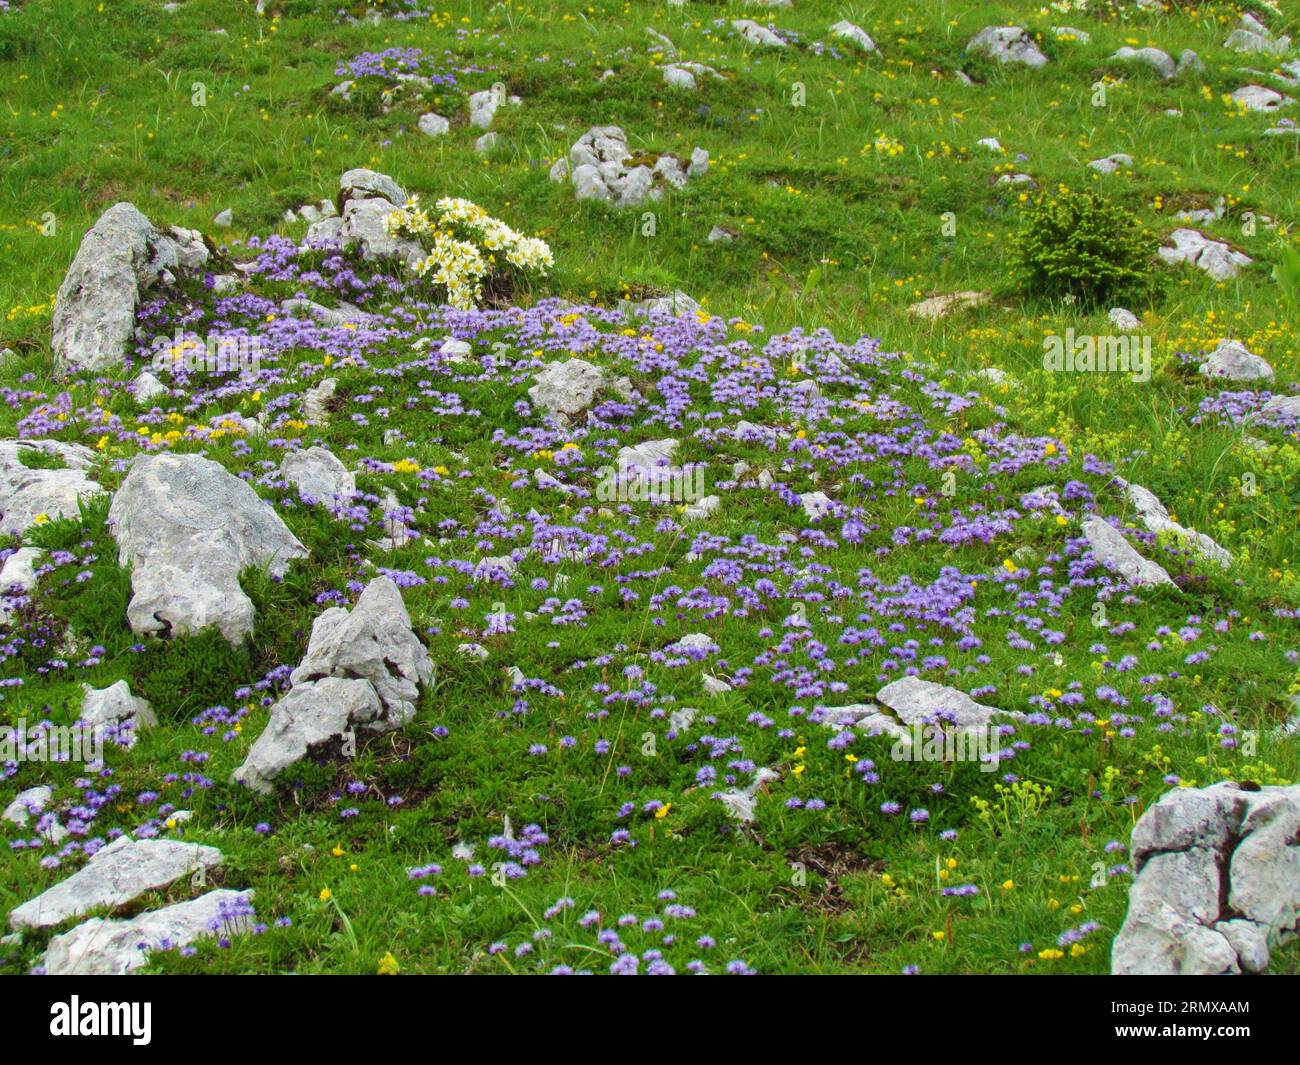 Rock garden of Globularia nudicaulis with a small patch mountain avens (Dryas octopetala) growing in the back Stock Photo